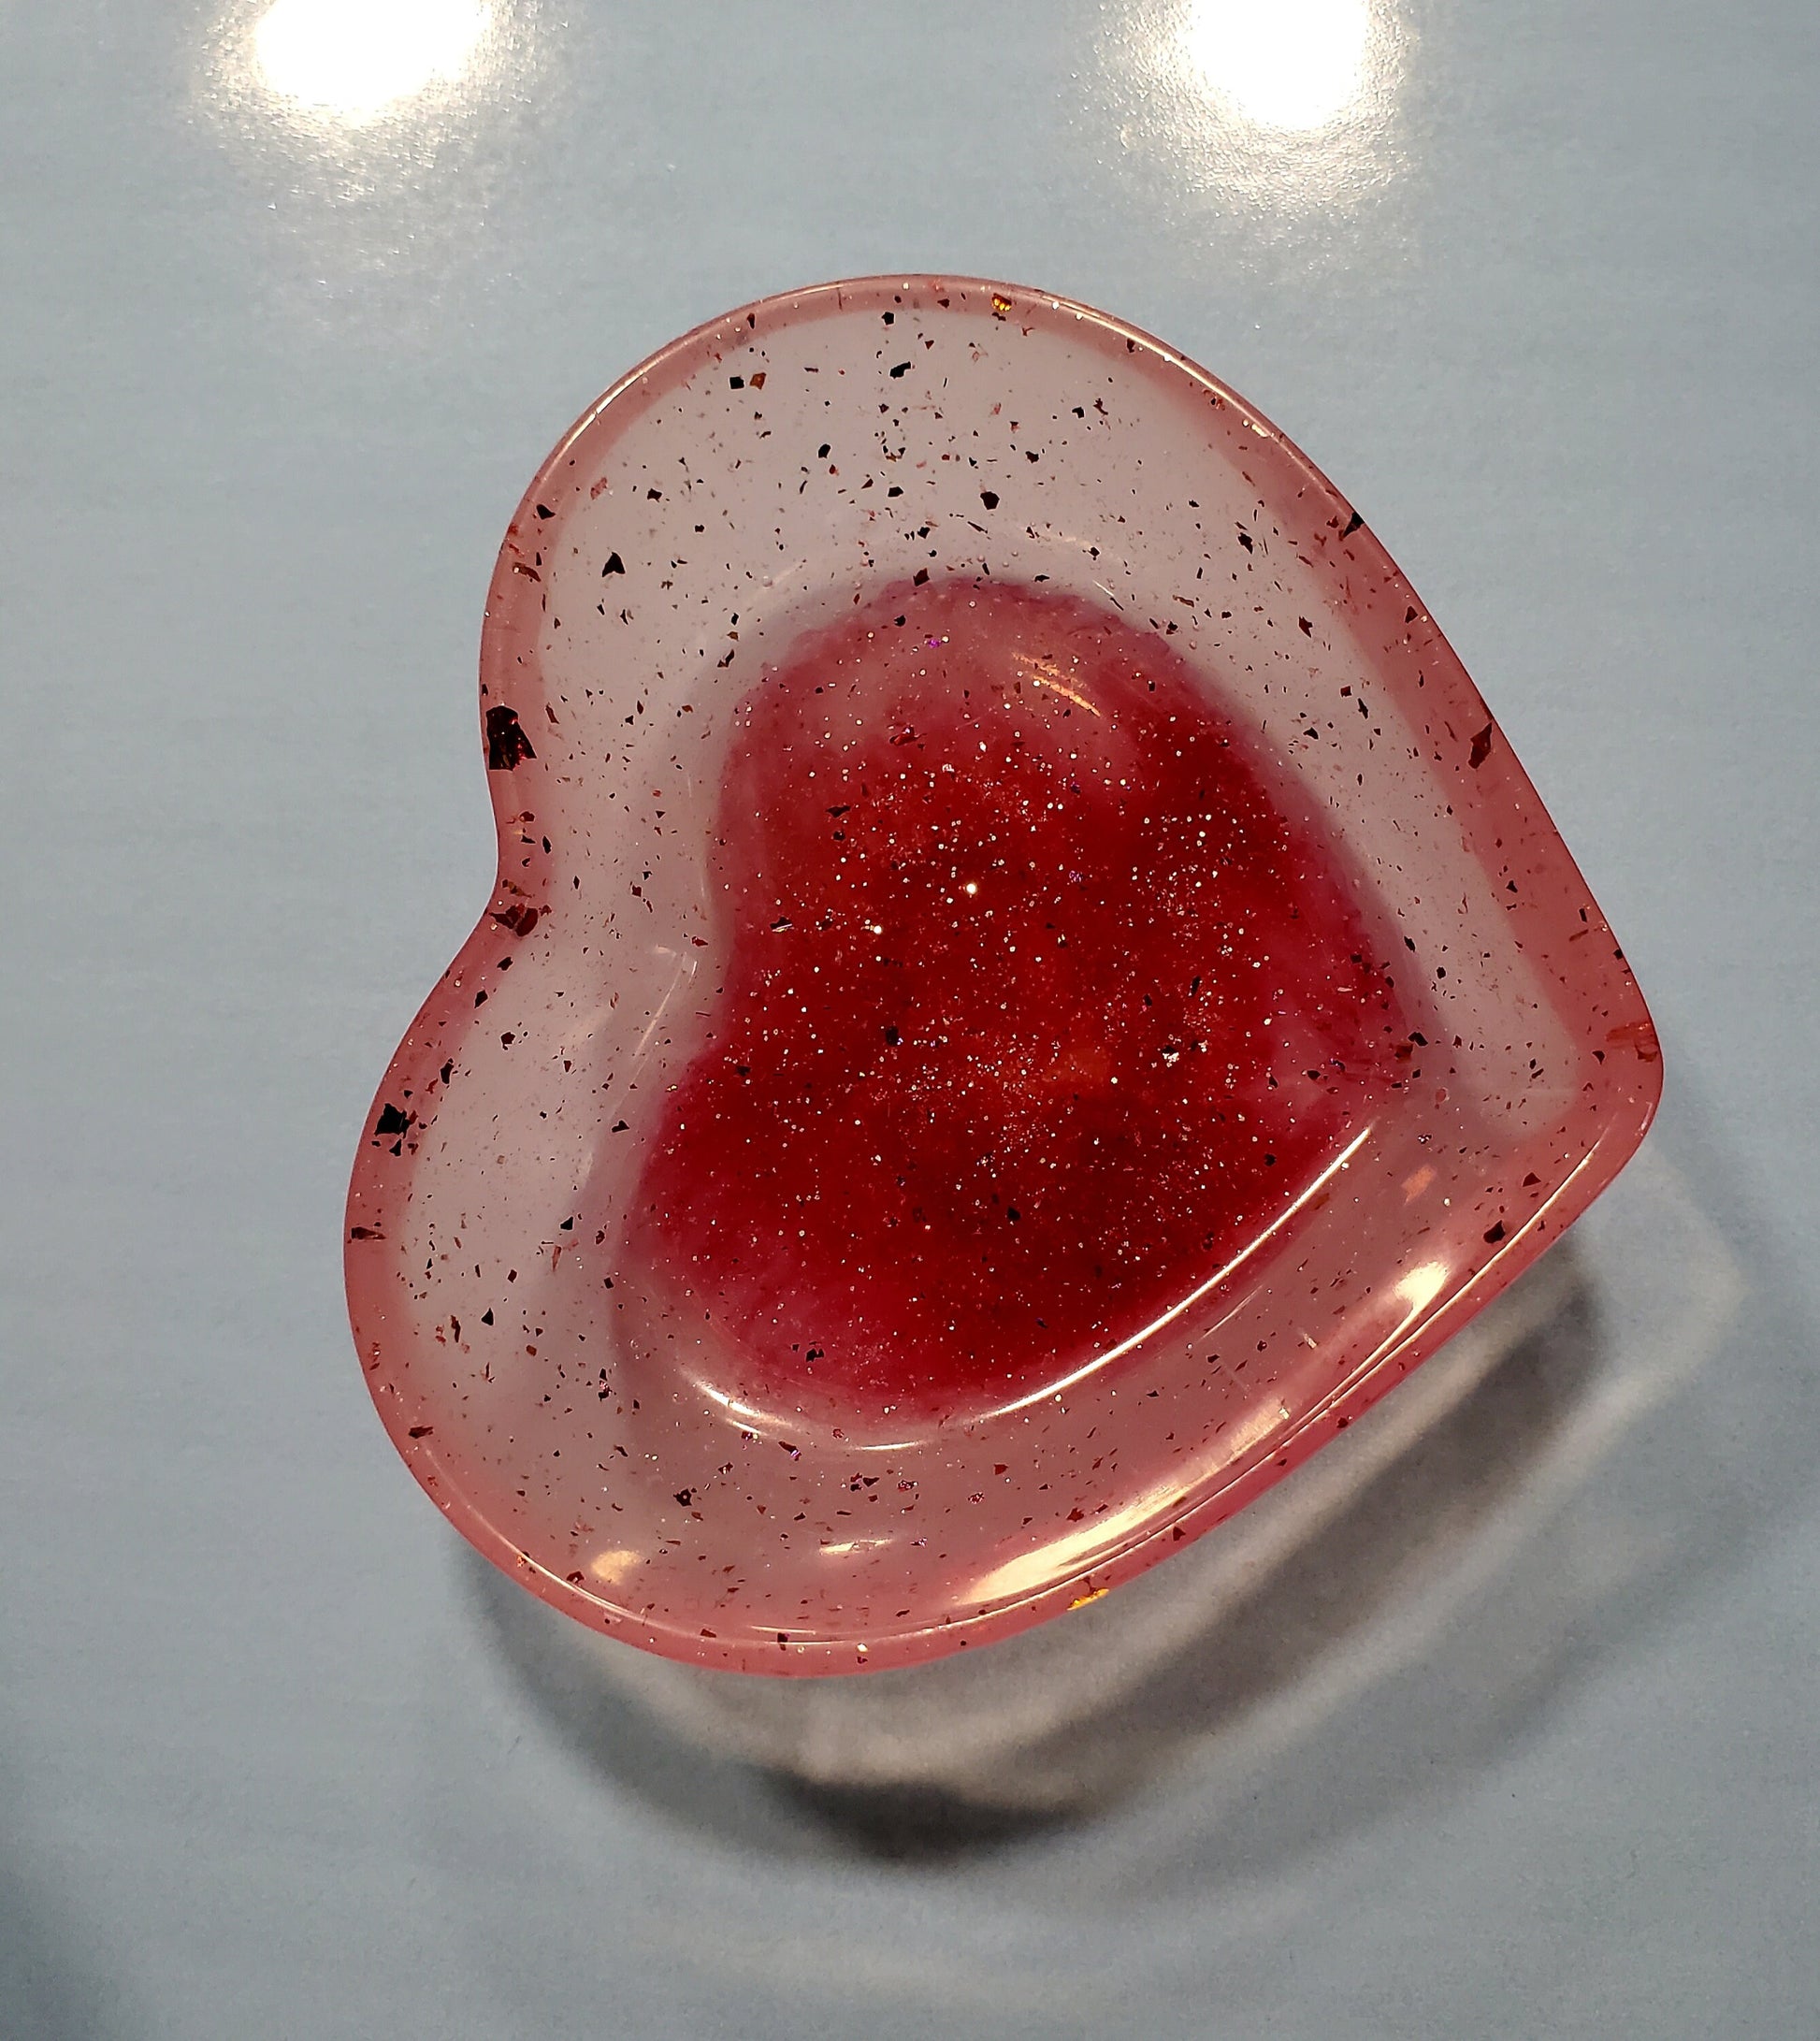 Multiple Designs Heart Shaped Jewelry Dish, Resin Dish